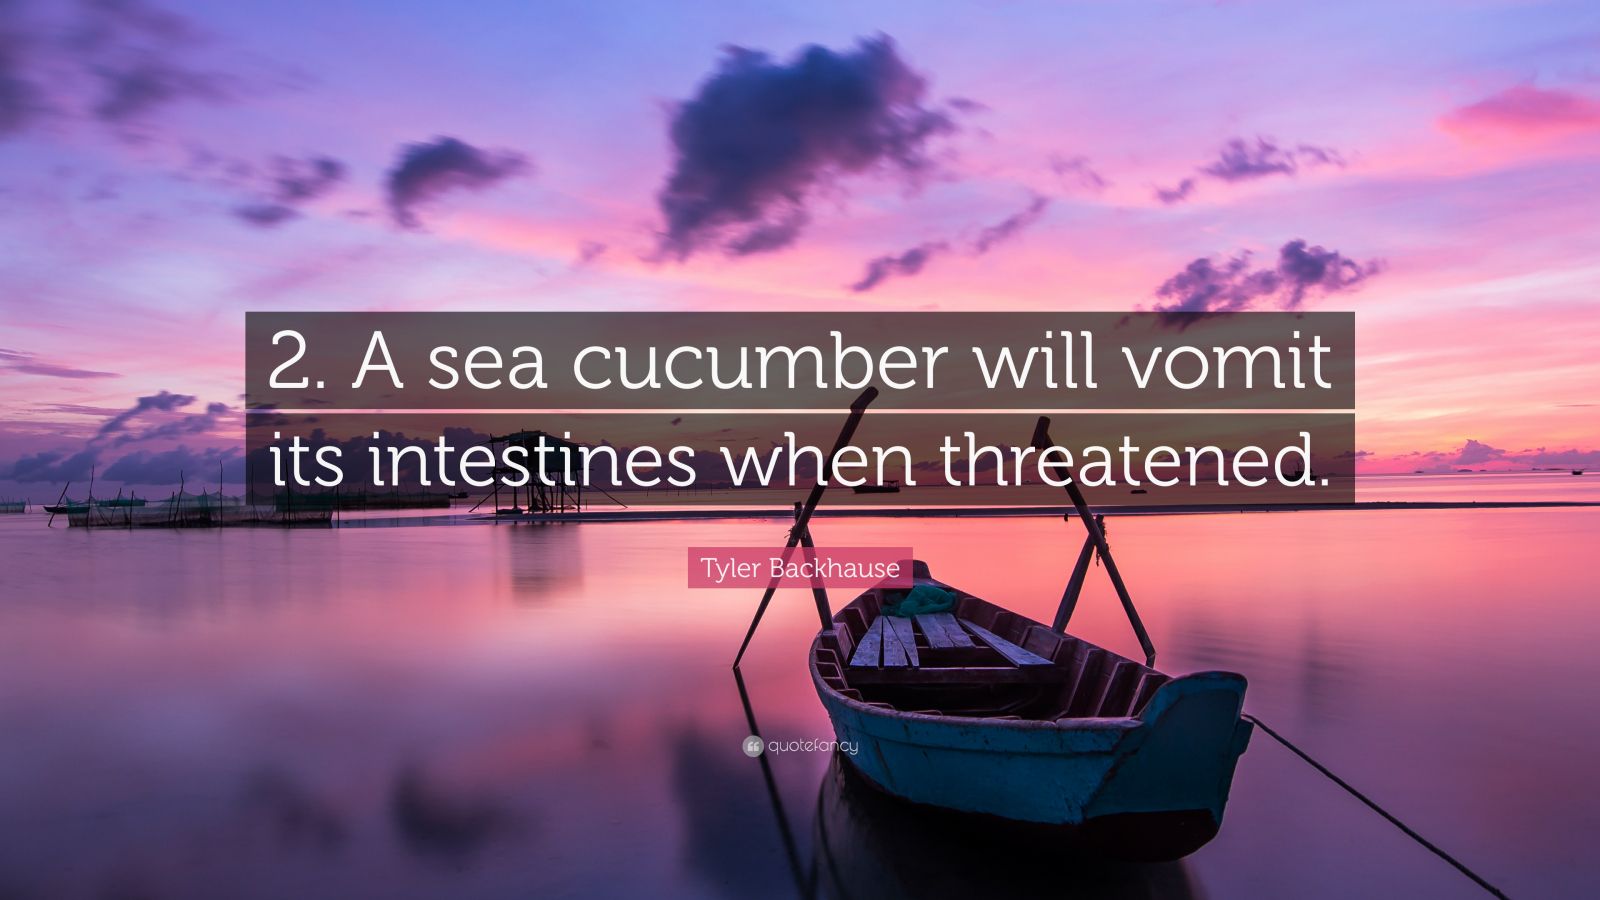 Tyler Backhause Quote: “2. A sea cucumber will vomit its intestines ...